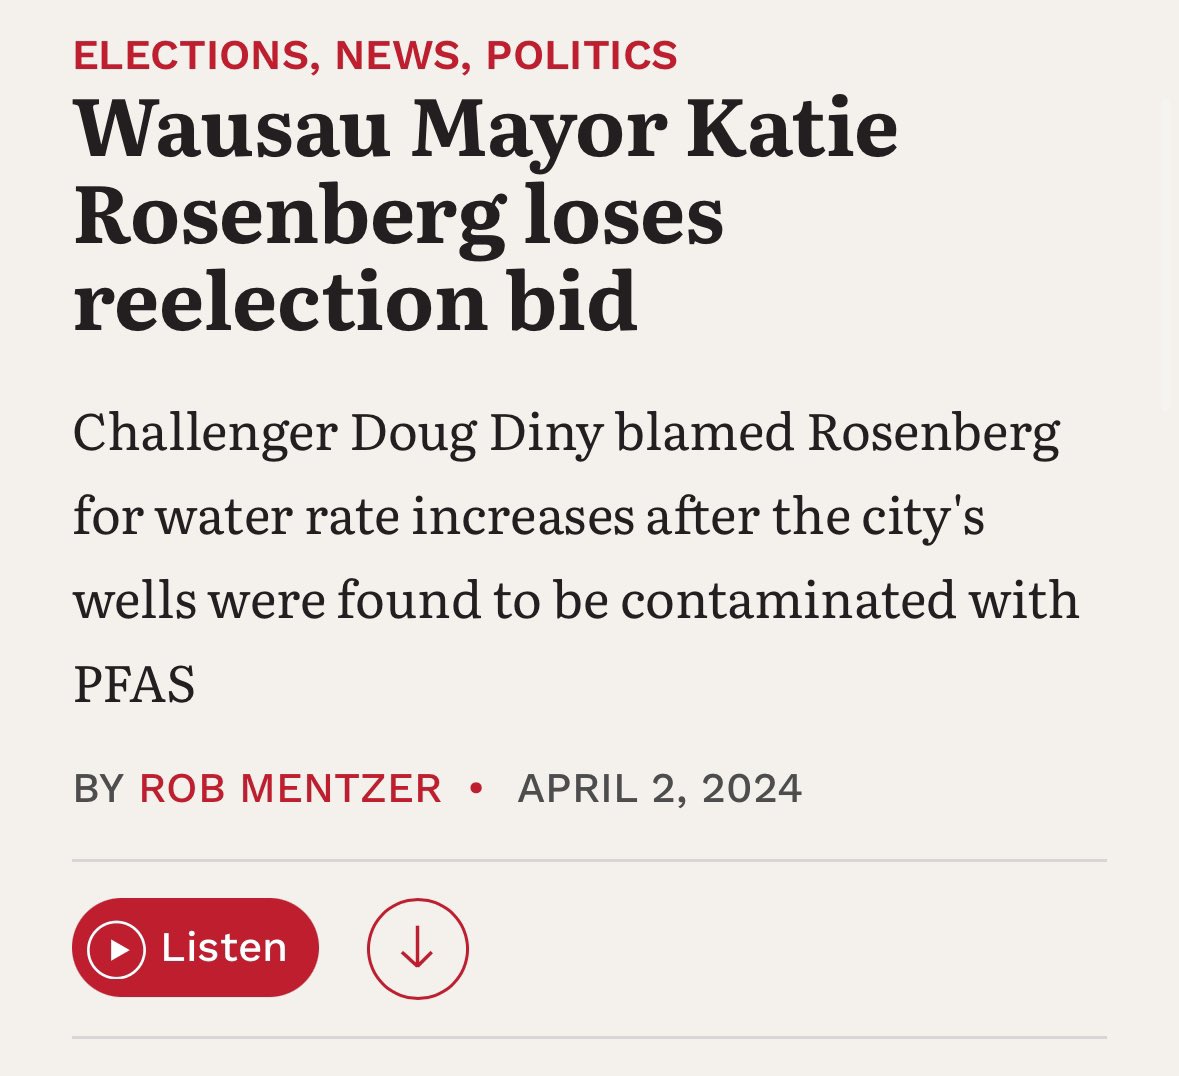 In case you’re wondering how much voters have lost it, the mayor of Wausau discovered harmful PFAS chemicals in the water supply, and lost reelection because she got rid of them.